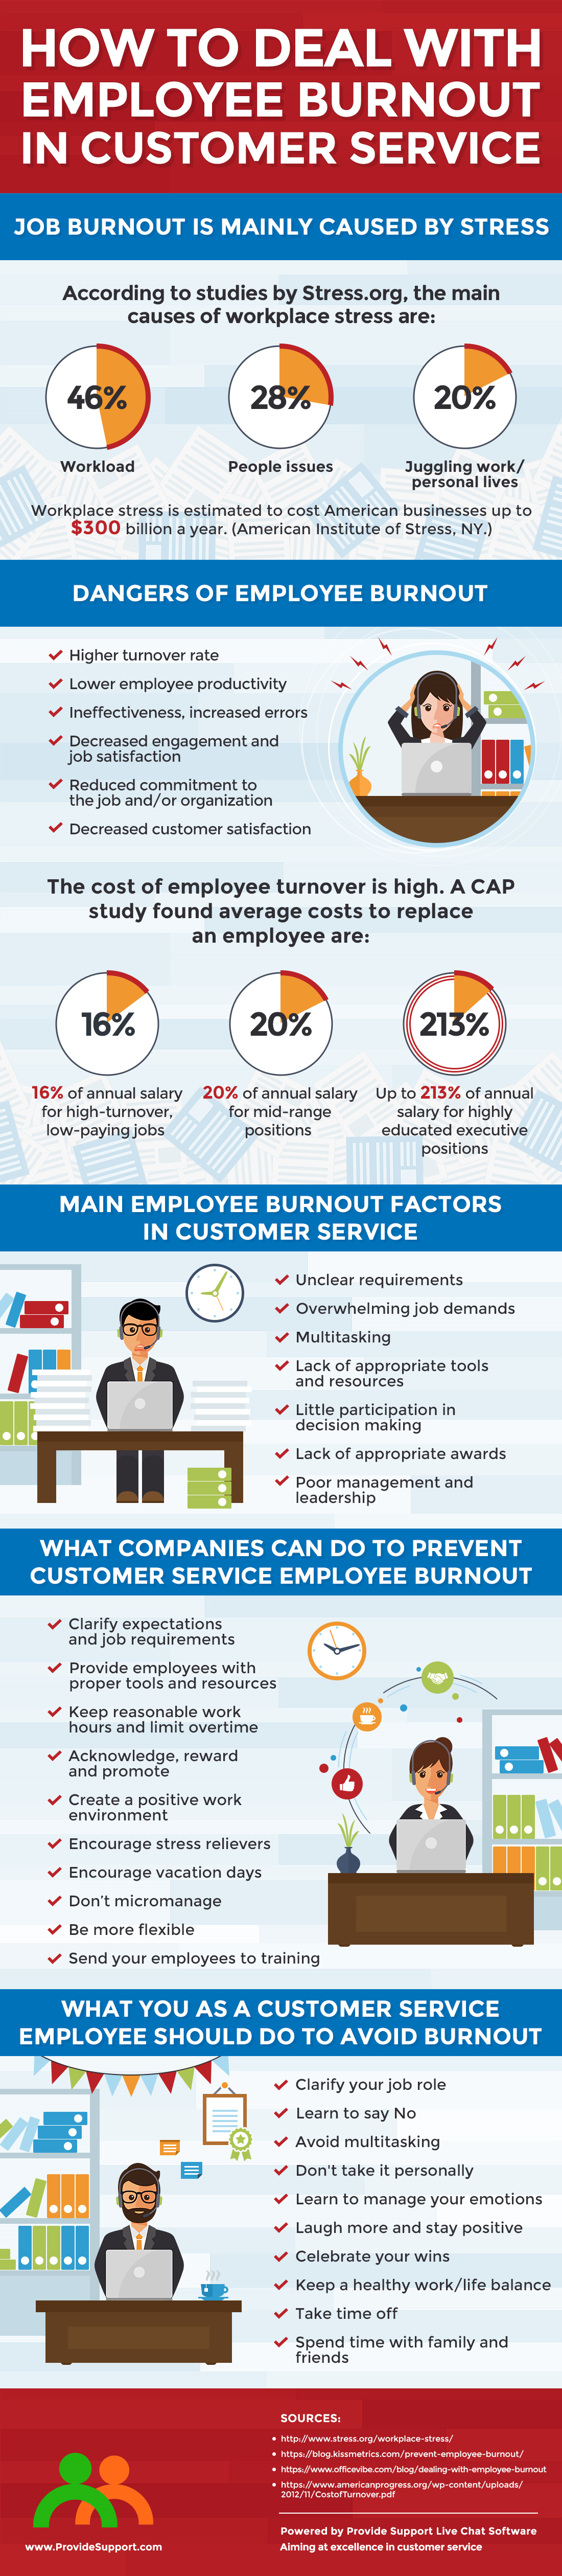 How to Deal with Employee Burnout in Customer Service